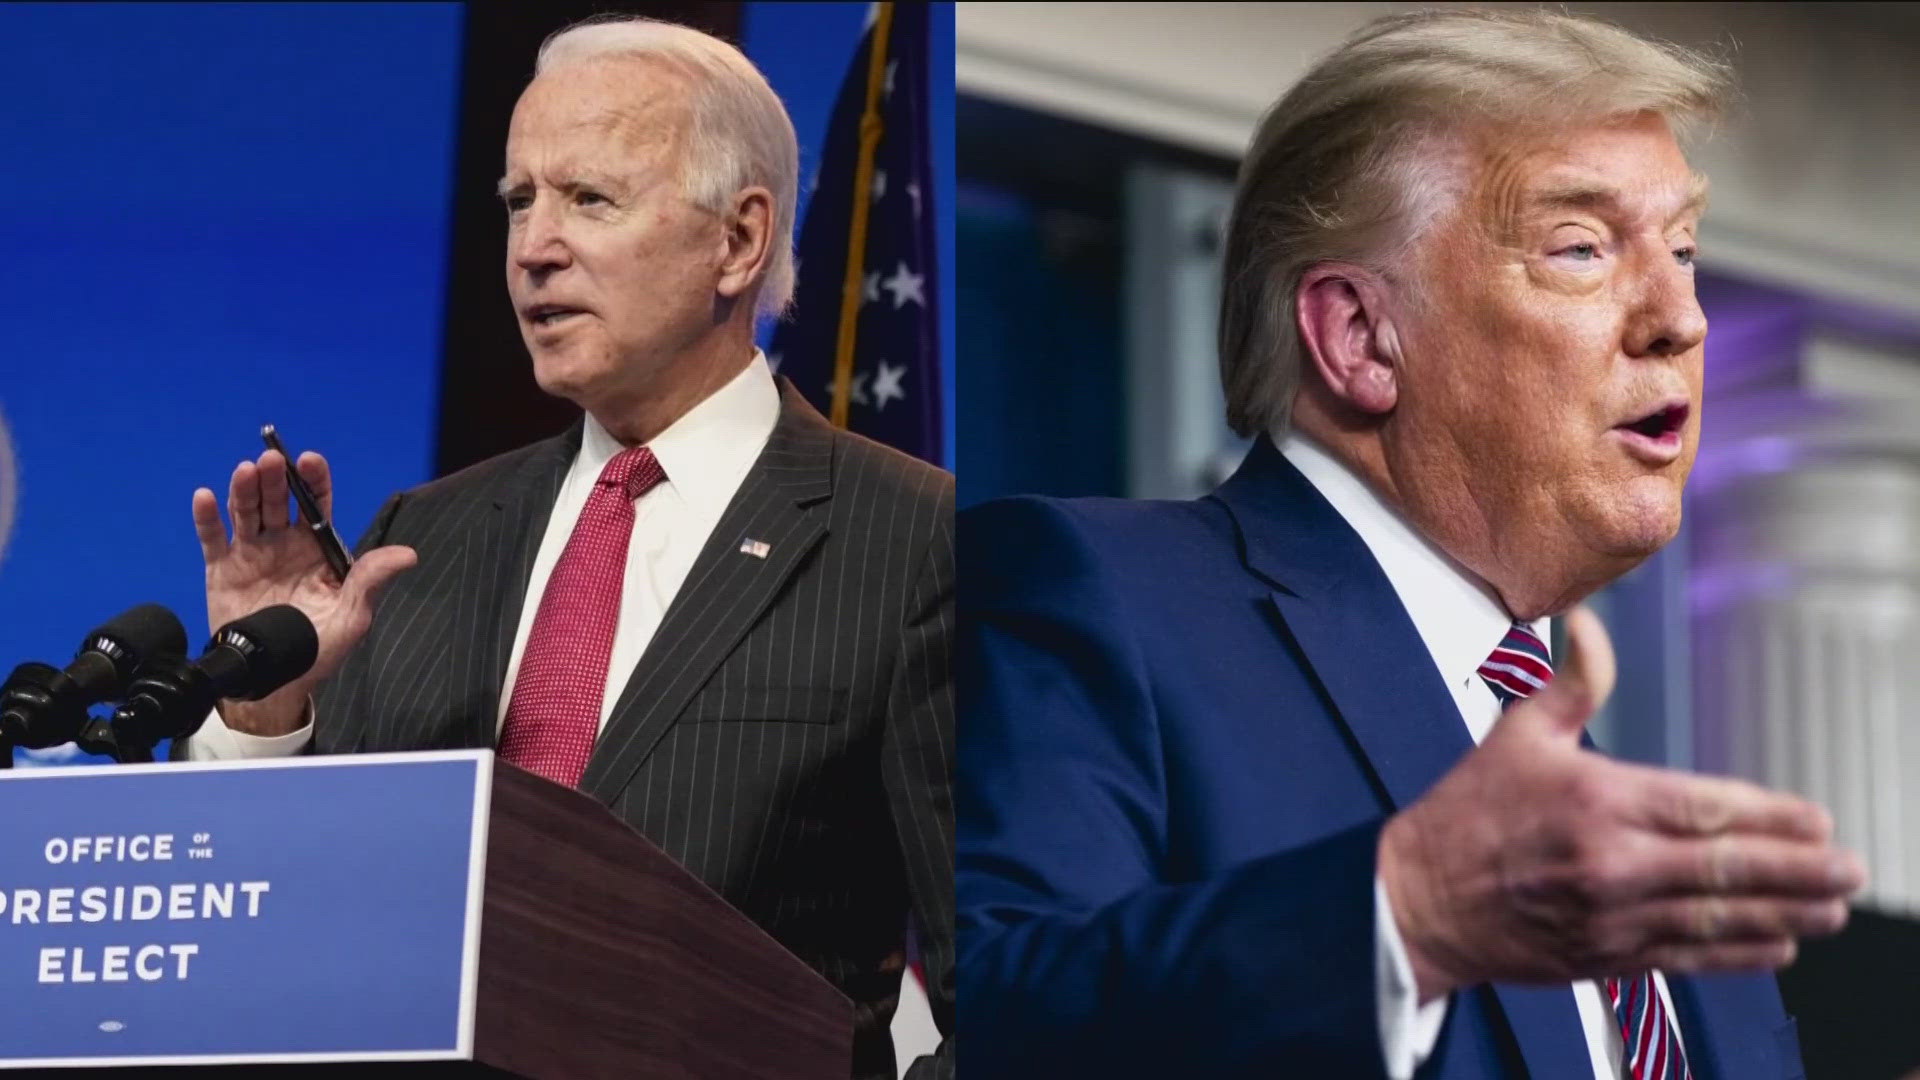 PRESIDENT BIDEN AND FORMER PRESIDENT TRUMP APPEAR TO BE CHARTING A NEW COURSE WHEN IT COMES TO DEBATING AHEAD OF THE PRESIDENTIAL ELECTION...